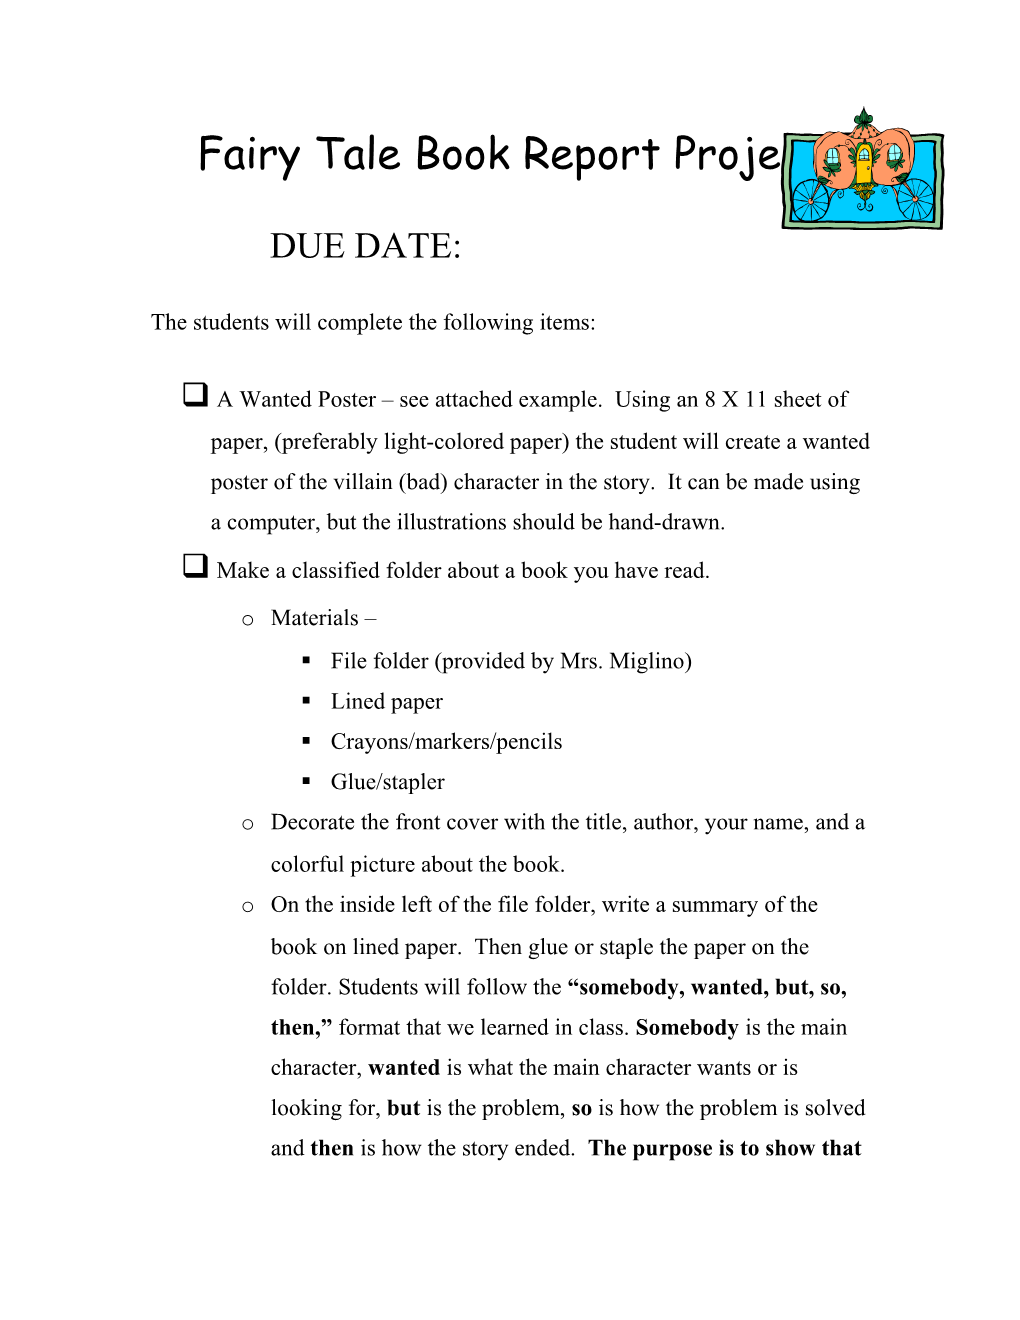 Fairy Tale Book Report Project